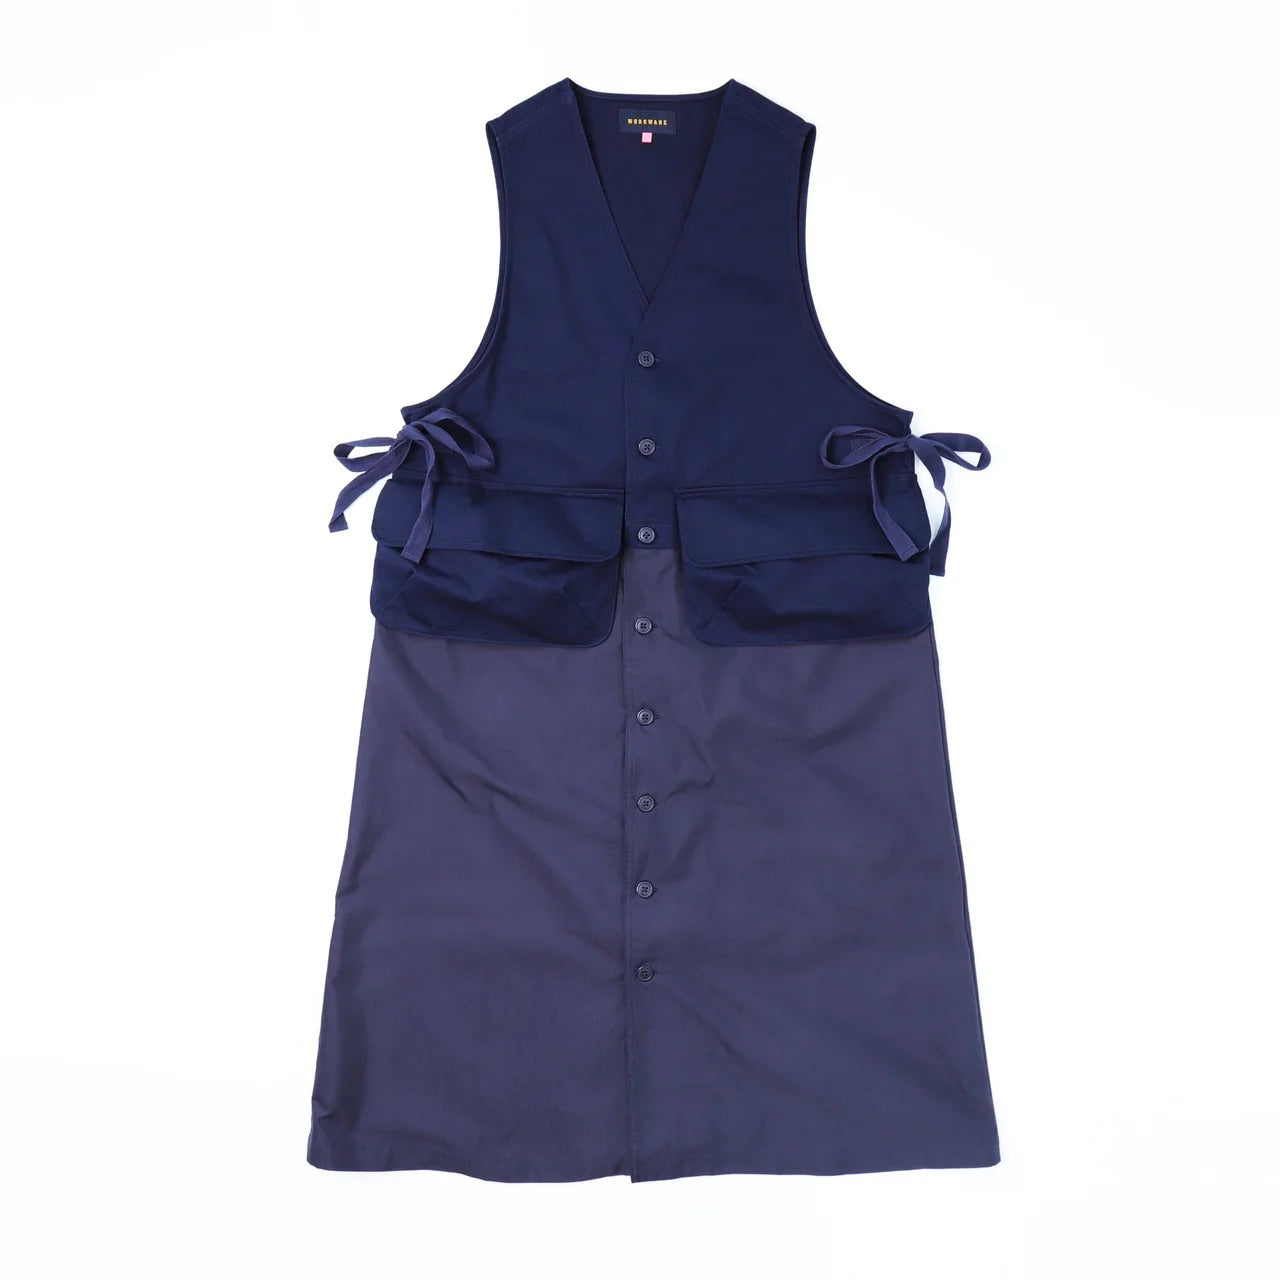 No:#616 | Name:FW23-MRS.WORKWARE FIELD ONE PIECE | Color:Navy | Size:Free【WORKWARE】